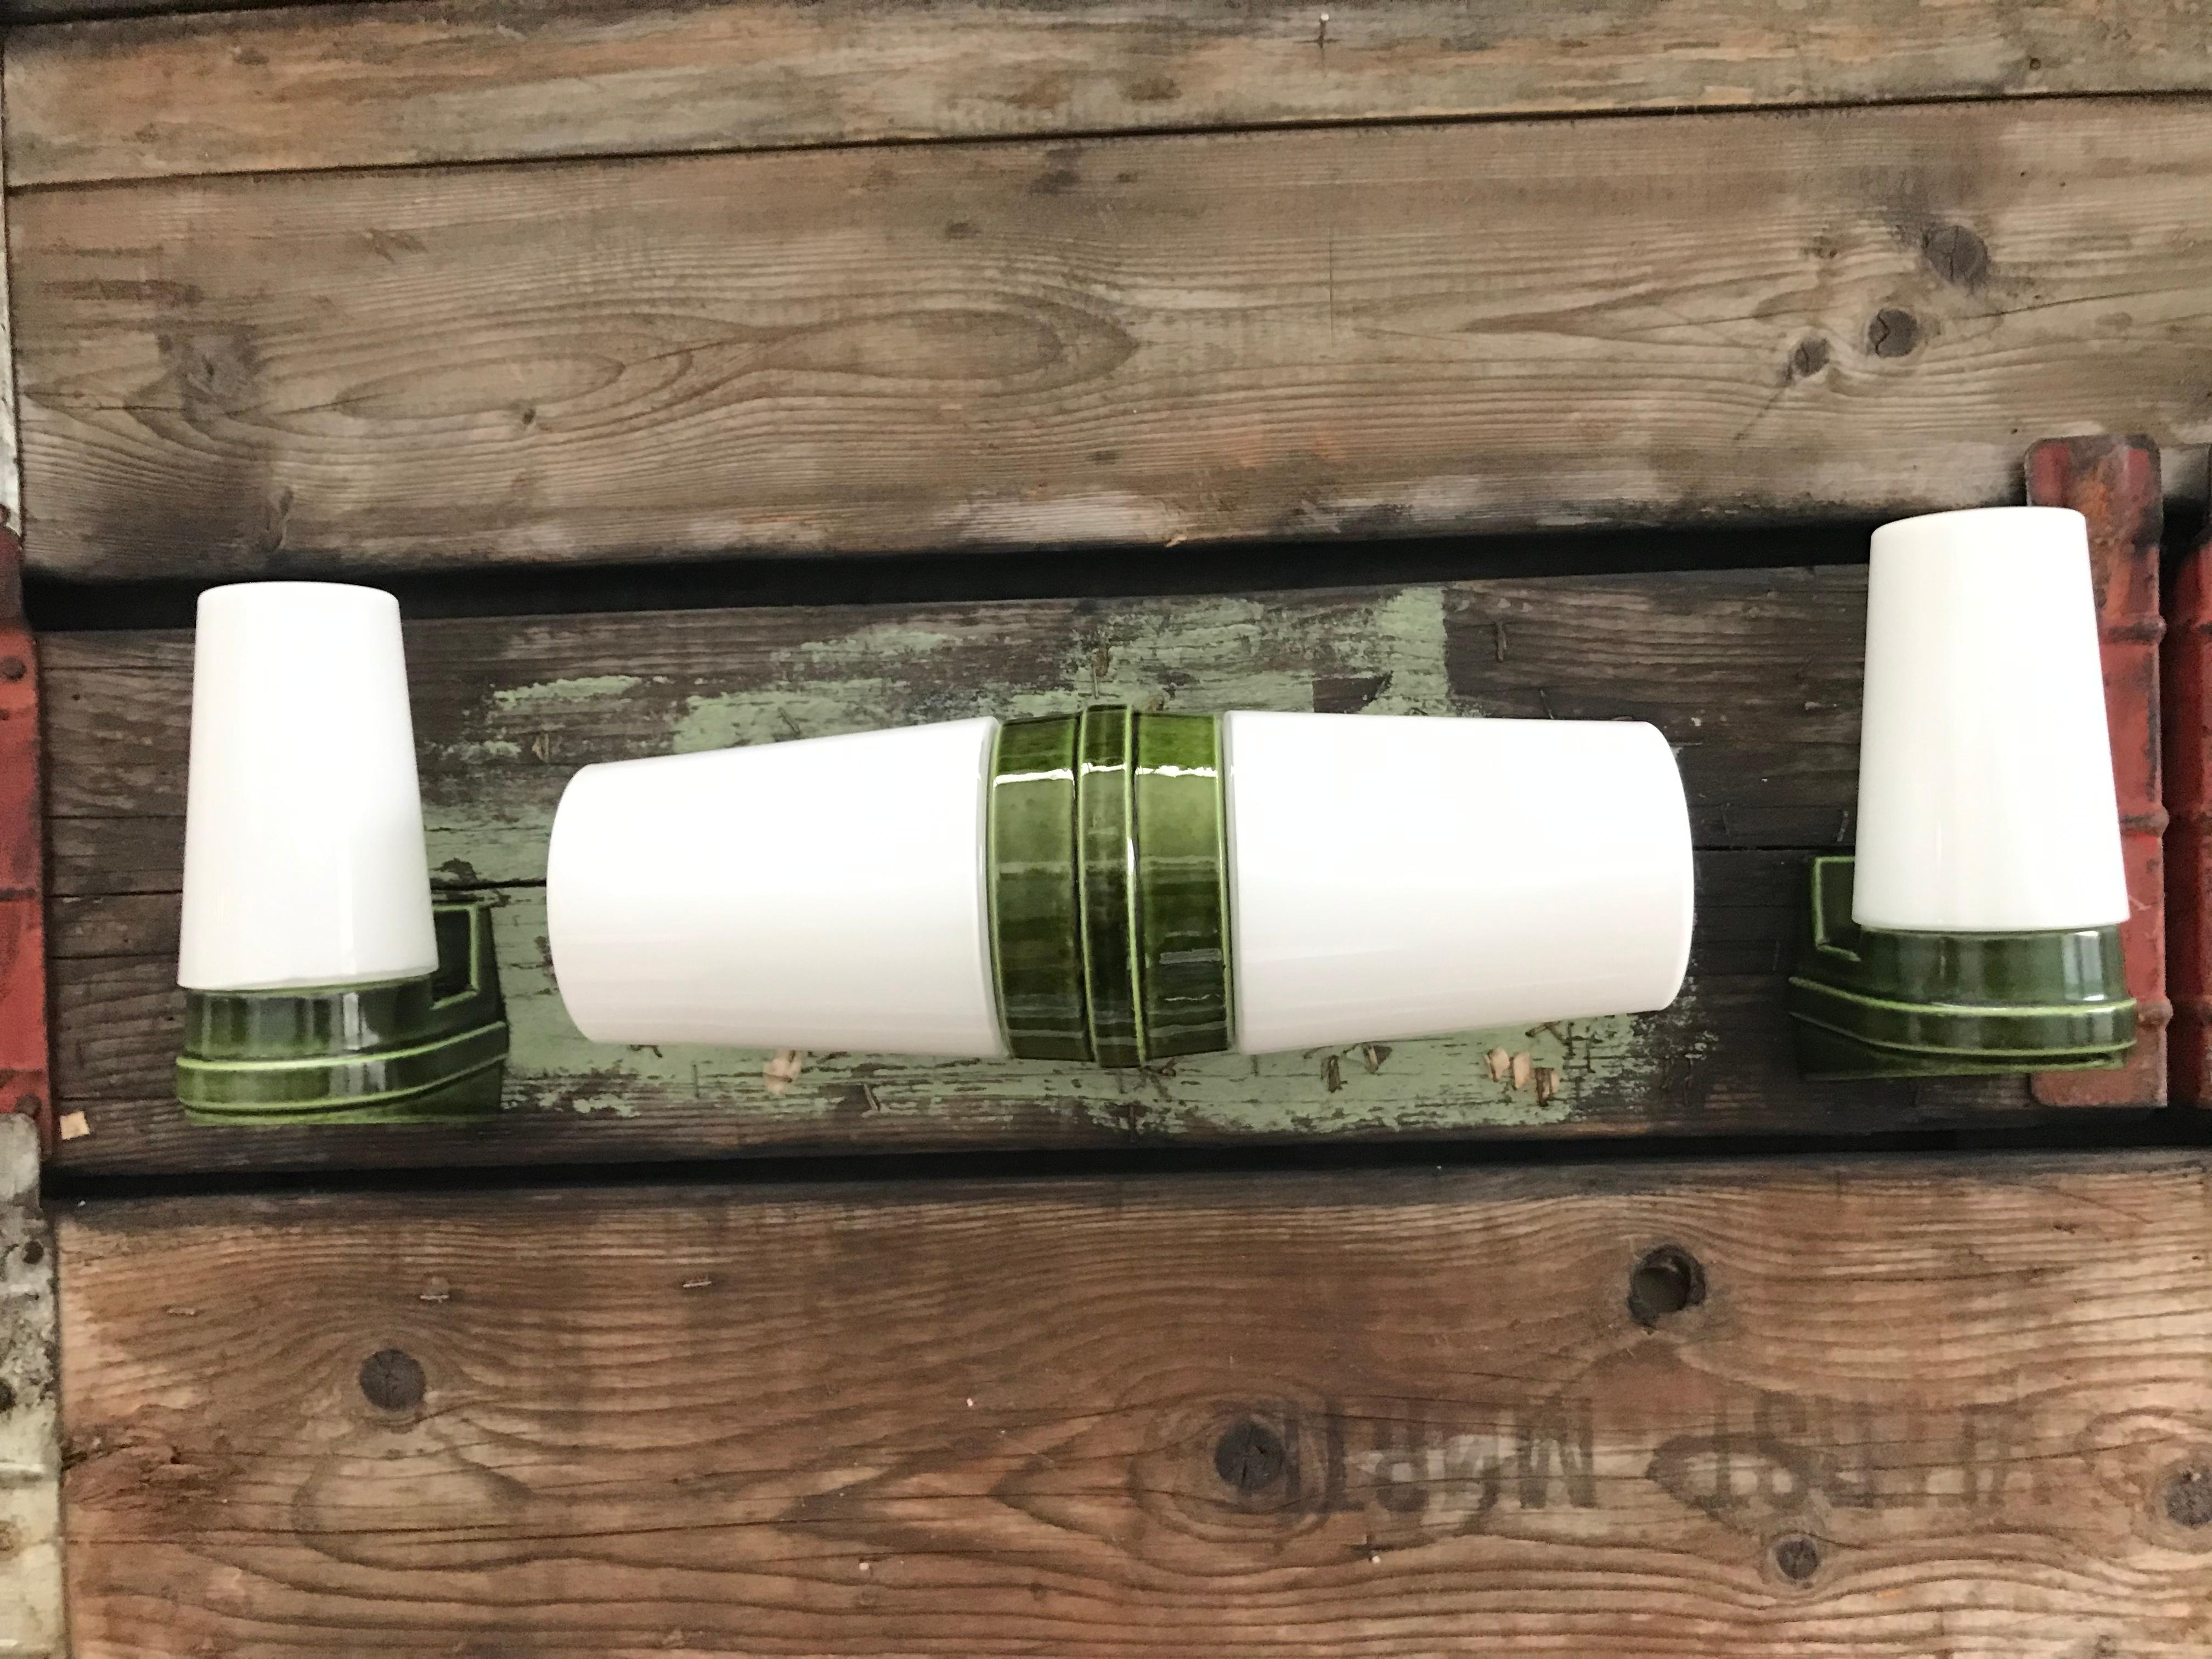 A set 3 vintage Ifö of Sweden ceramic bathroom lamps model 6065 and 6080 from the 1960s in lime green.
Designed by Sigvard Bernadotte. 
Opaline glass shades. 
Ceramic bulb holders for an E15 bulb
Lamps can be used as up or down lights.
In great